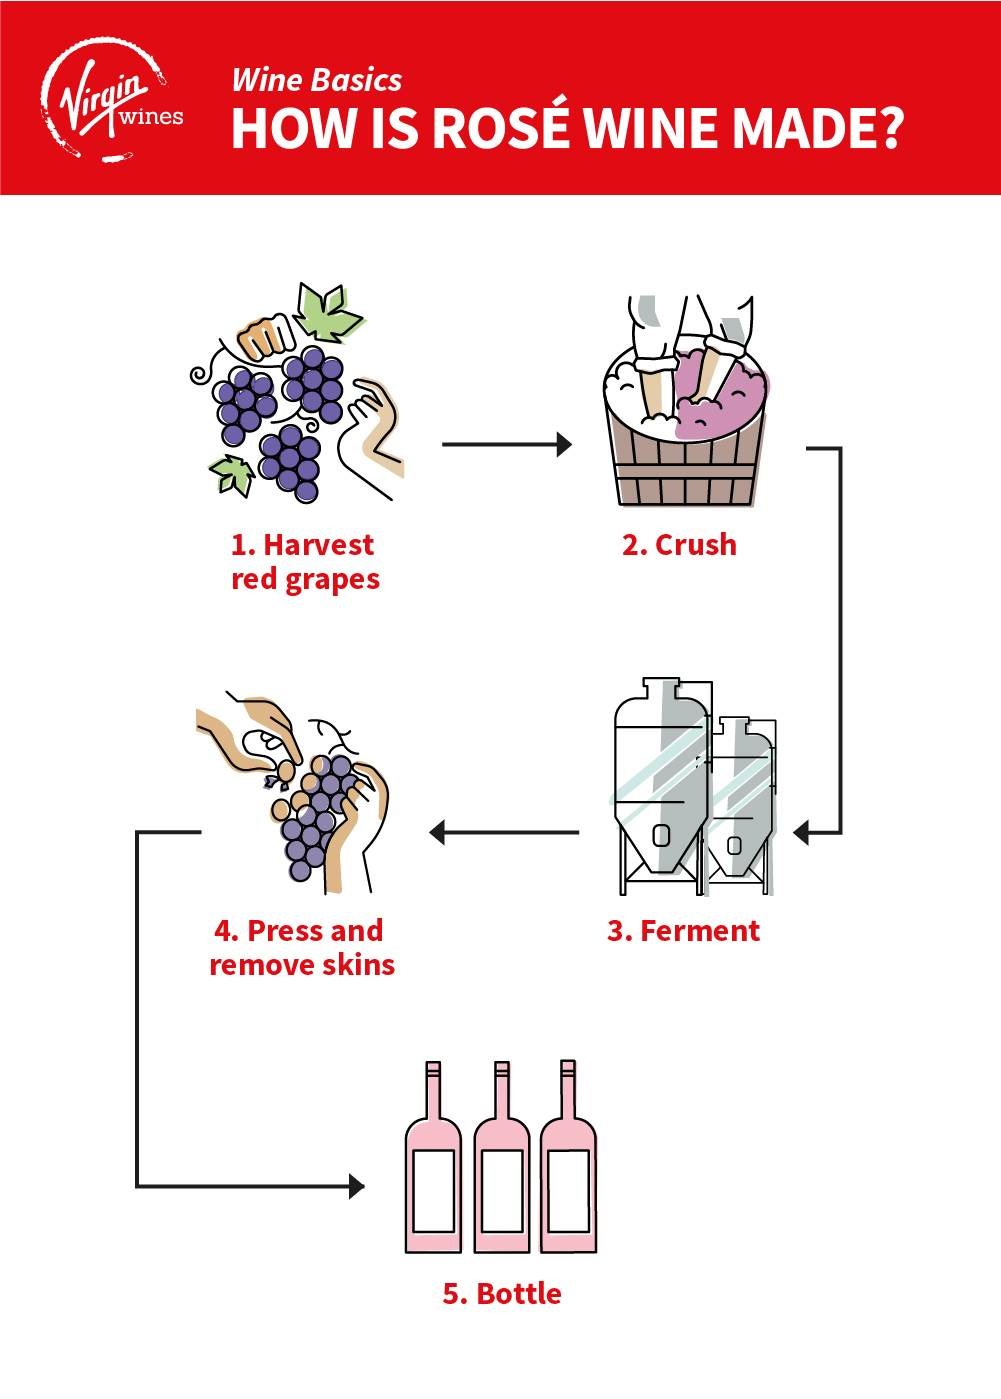 Infographic by Virgin Wines showing how rose wine is made